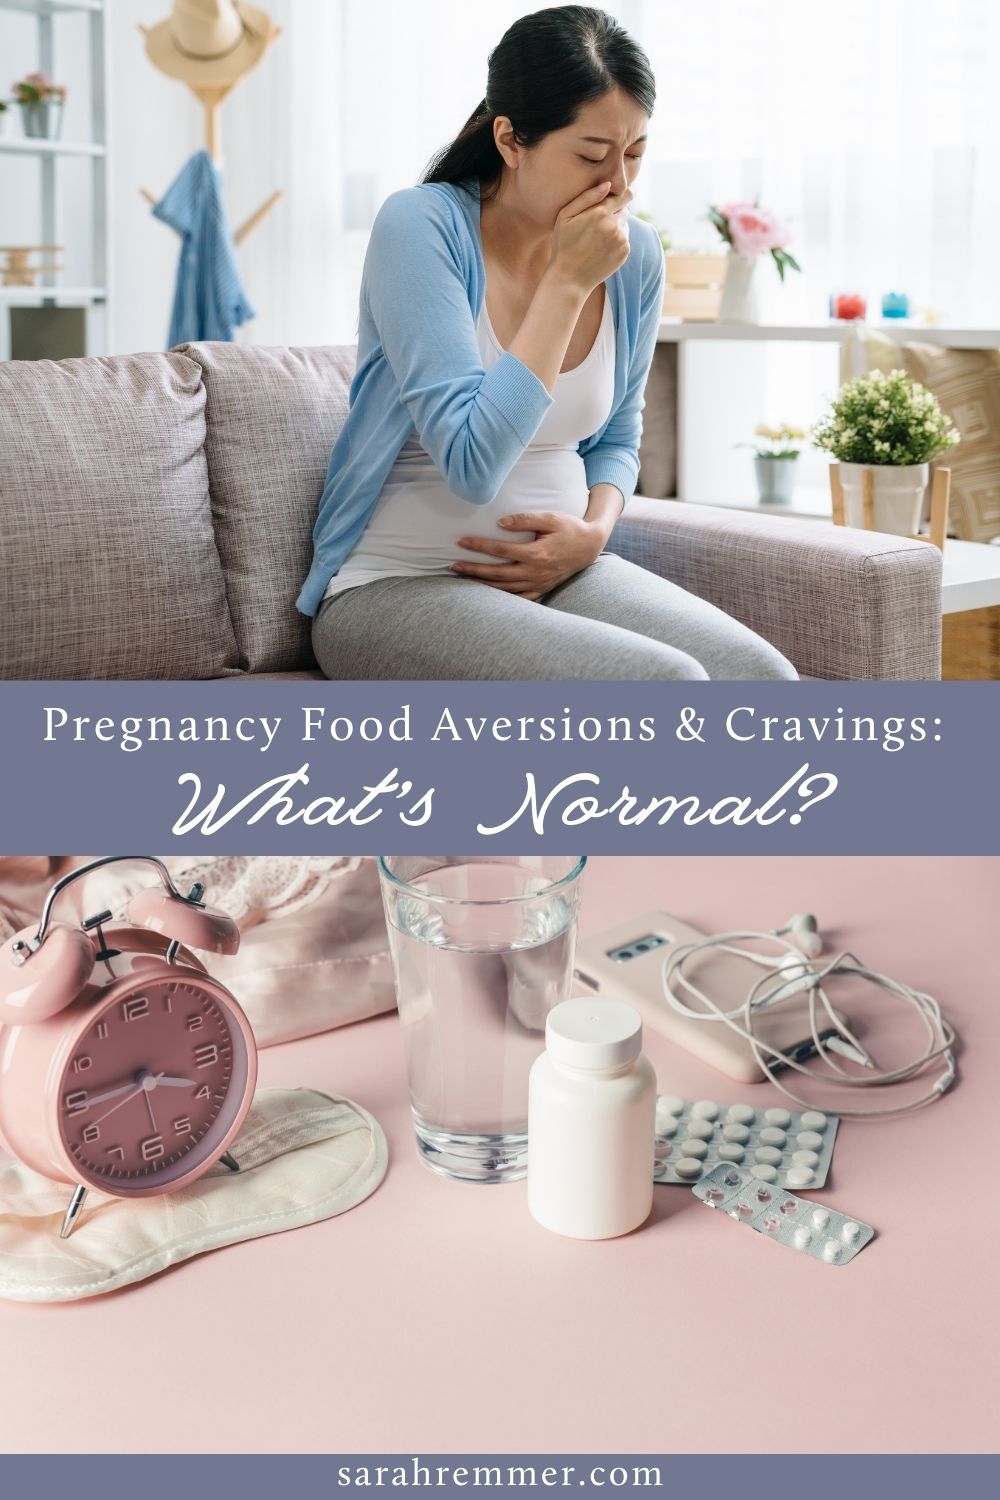 Food cravings and aversions are very common during pregnancy. Find out what they are, when they start, and what’s perfectly normal!